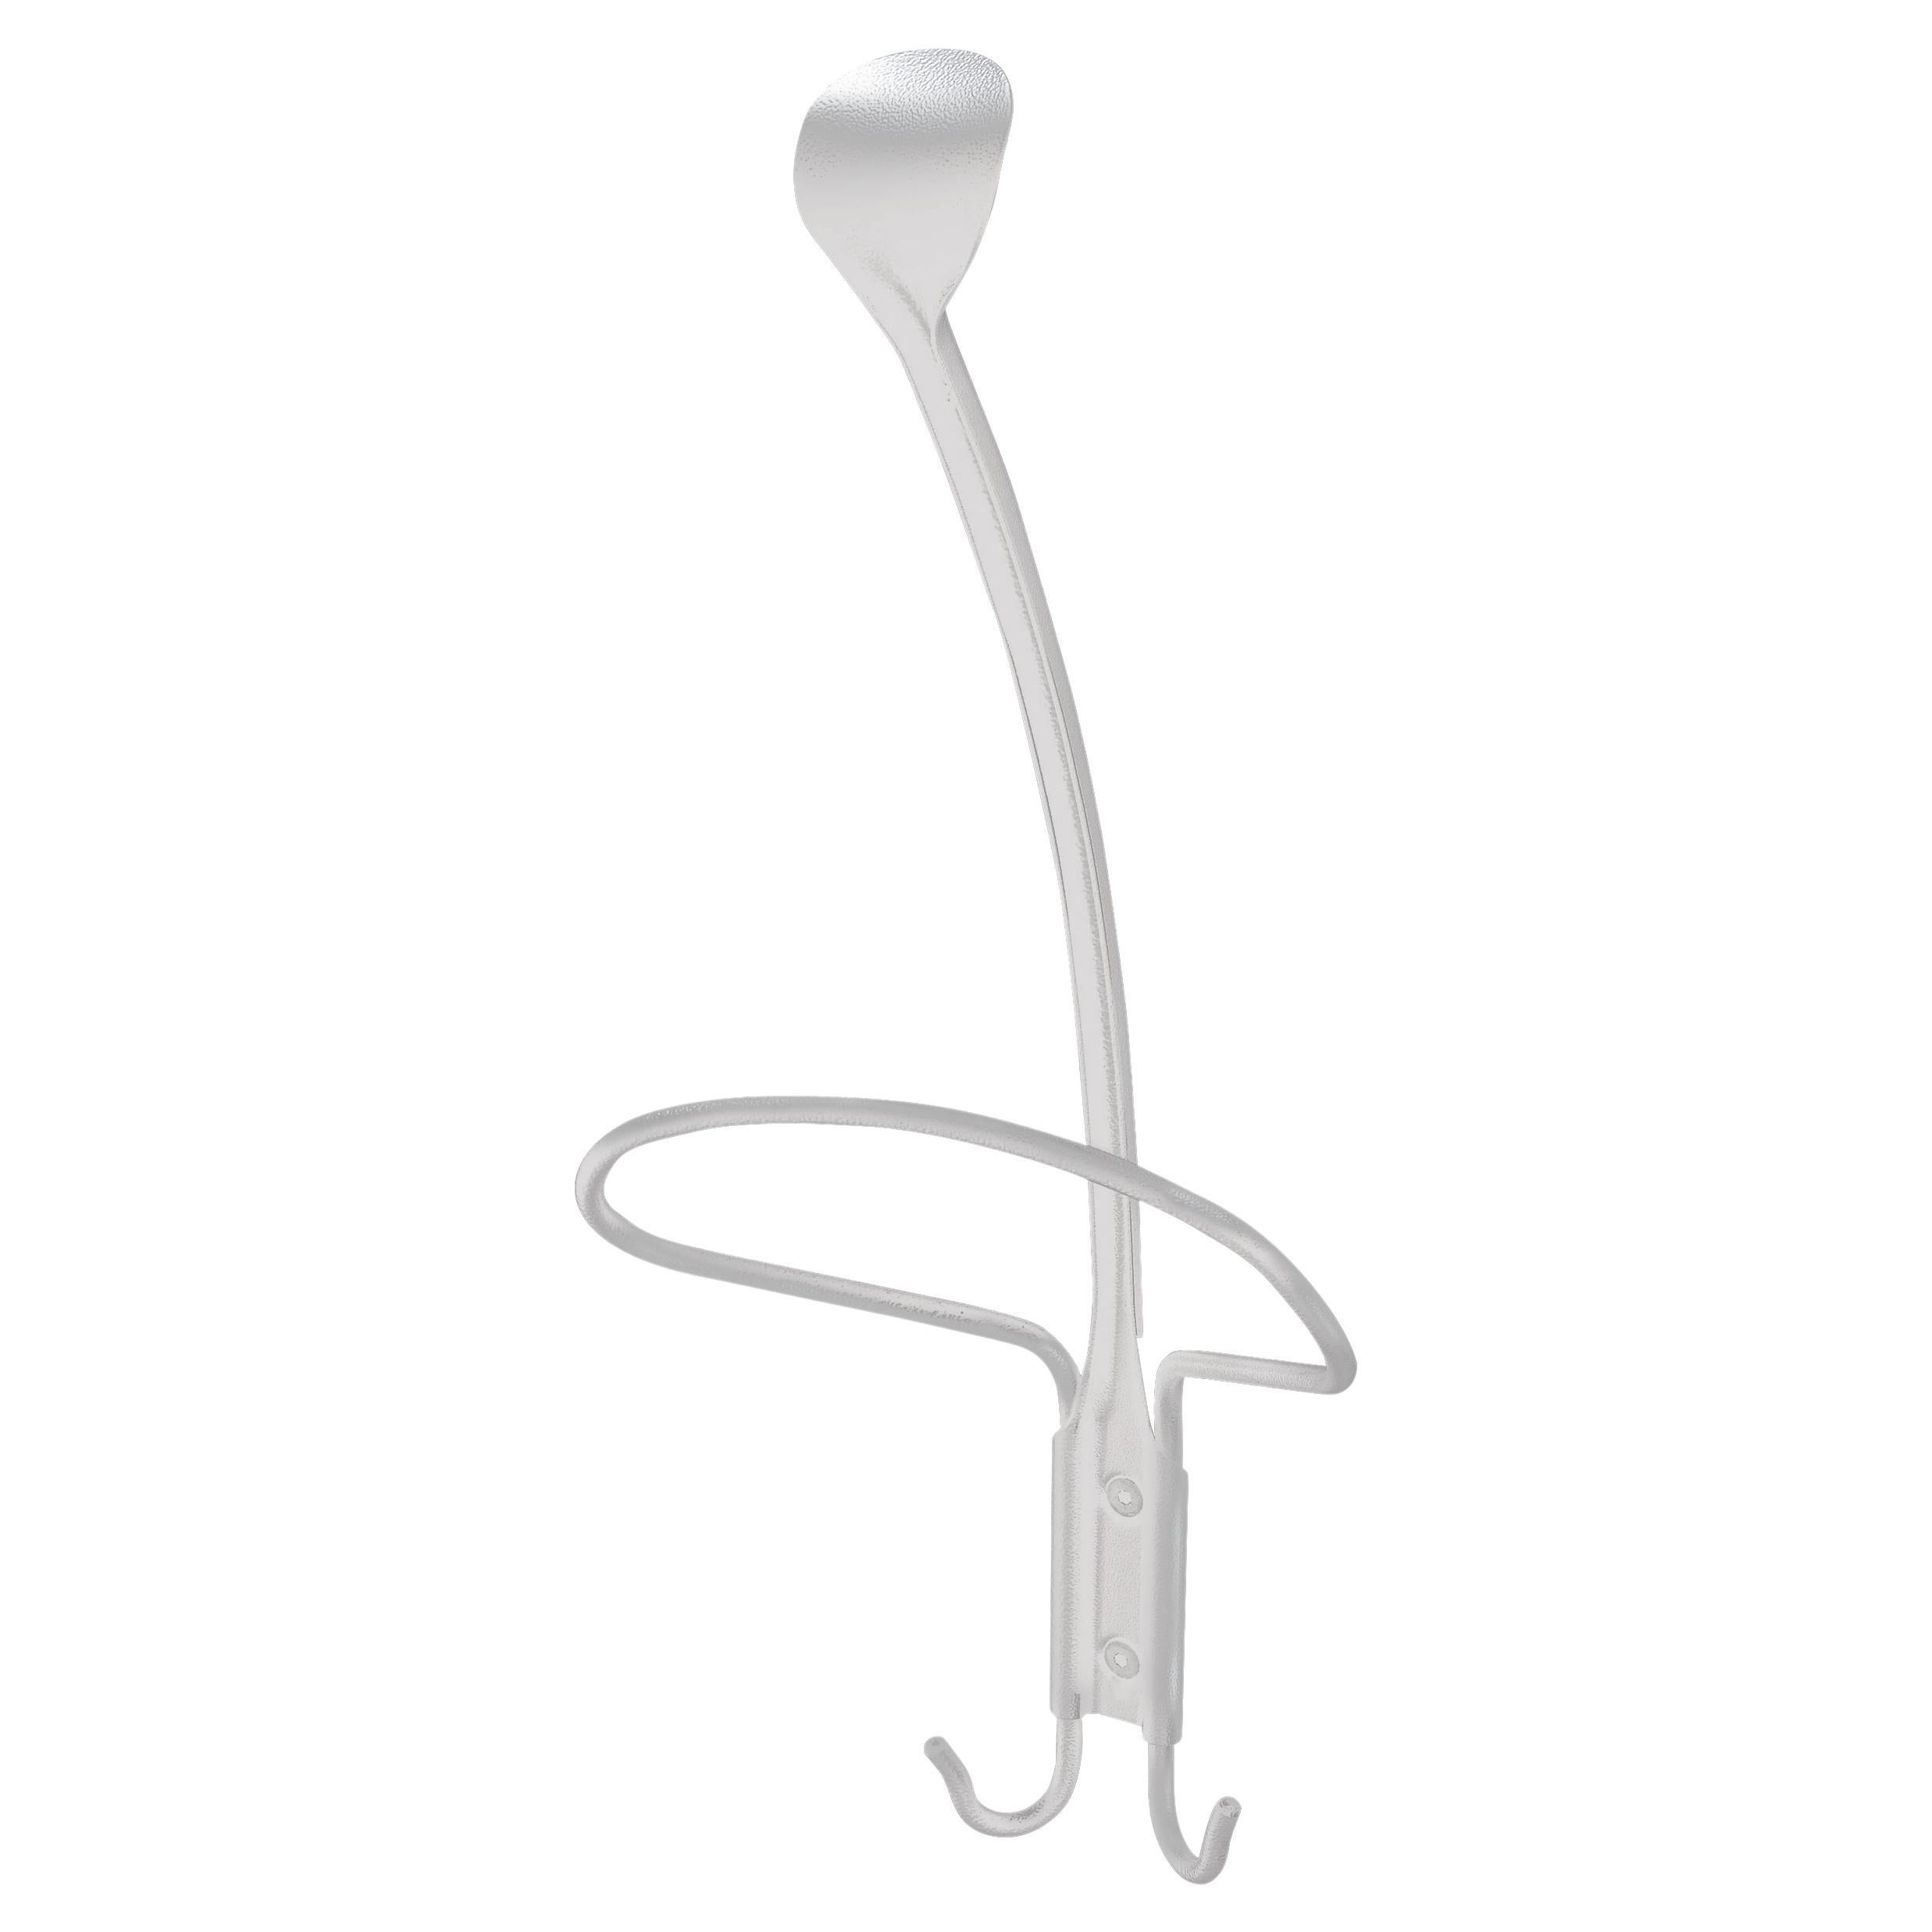 Zanotta Museo Coat Hanger in White Painted Steel with Scratch-Resistant Finish